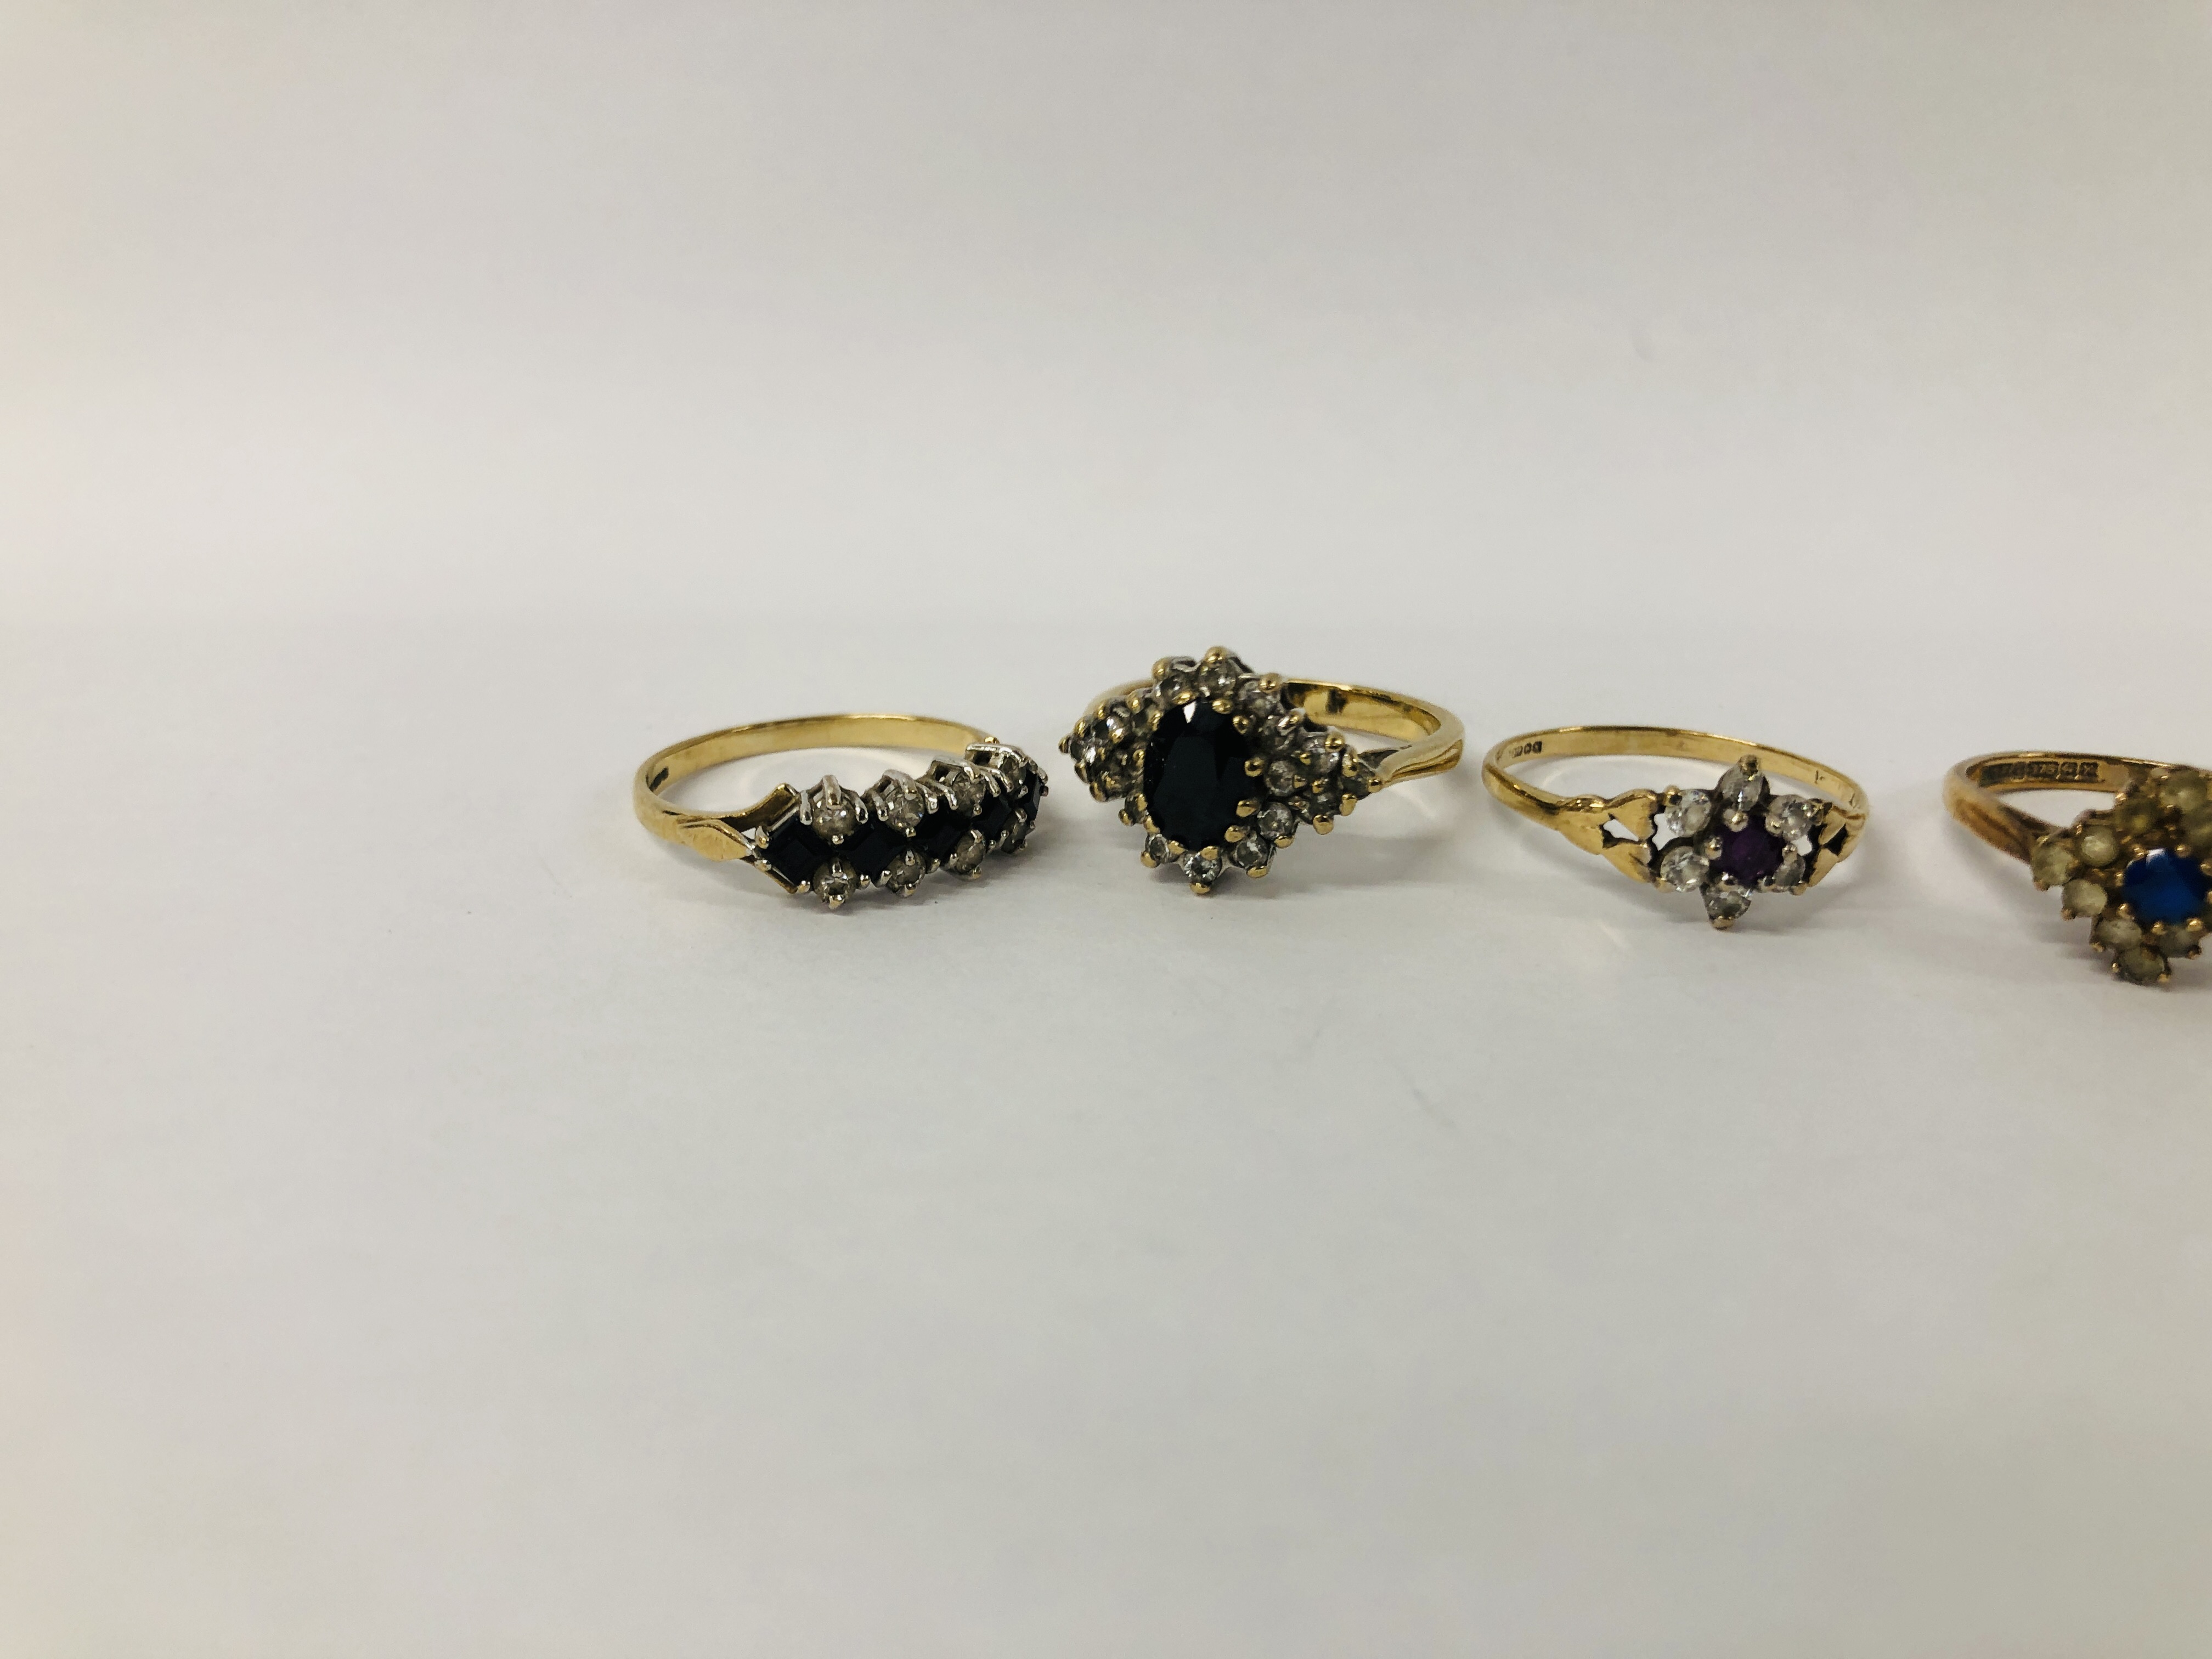 FOUR VARIOUS 9CT. GOLD STONE SET DRESS RINGS AND ONE PEARL SET RING MARKED 9KT. - Image 2 of 9